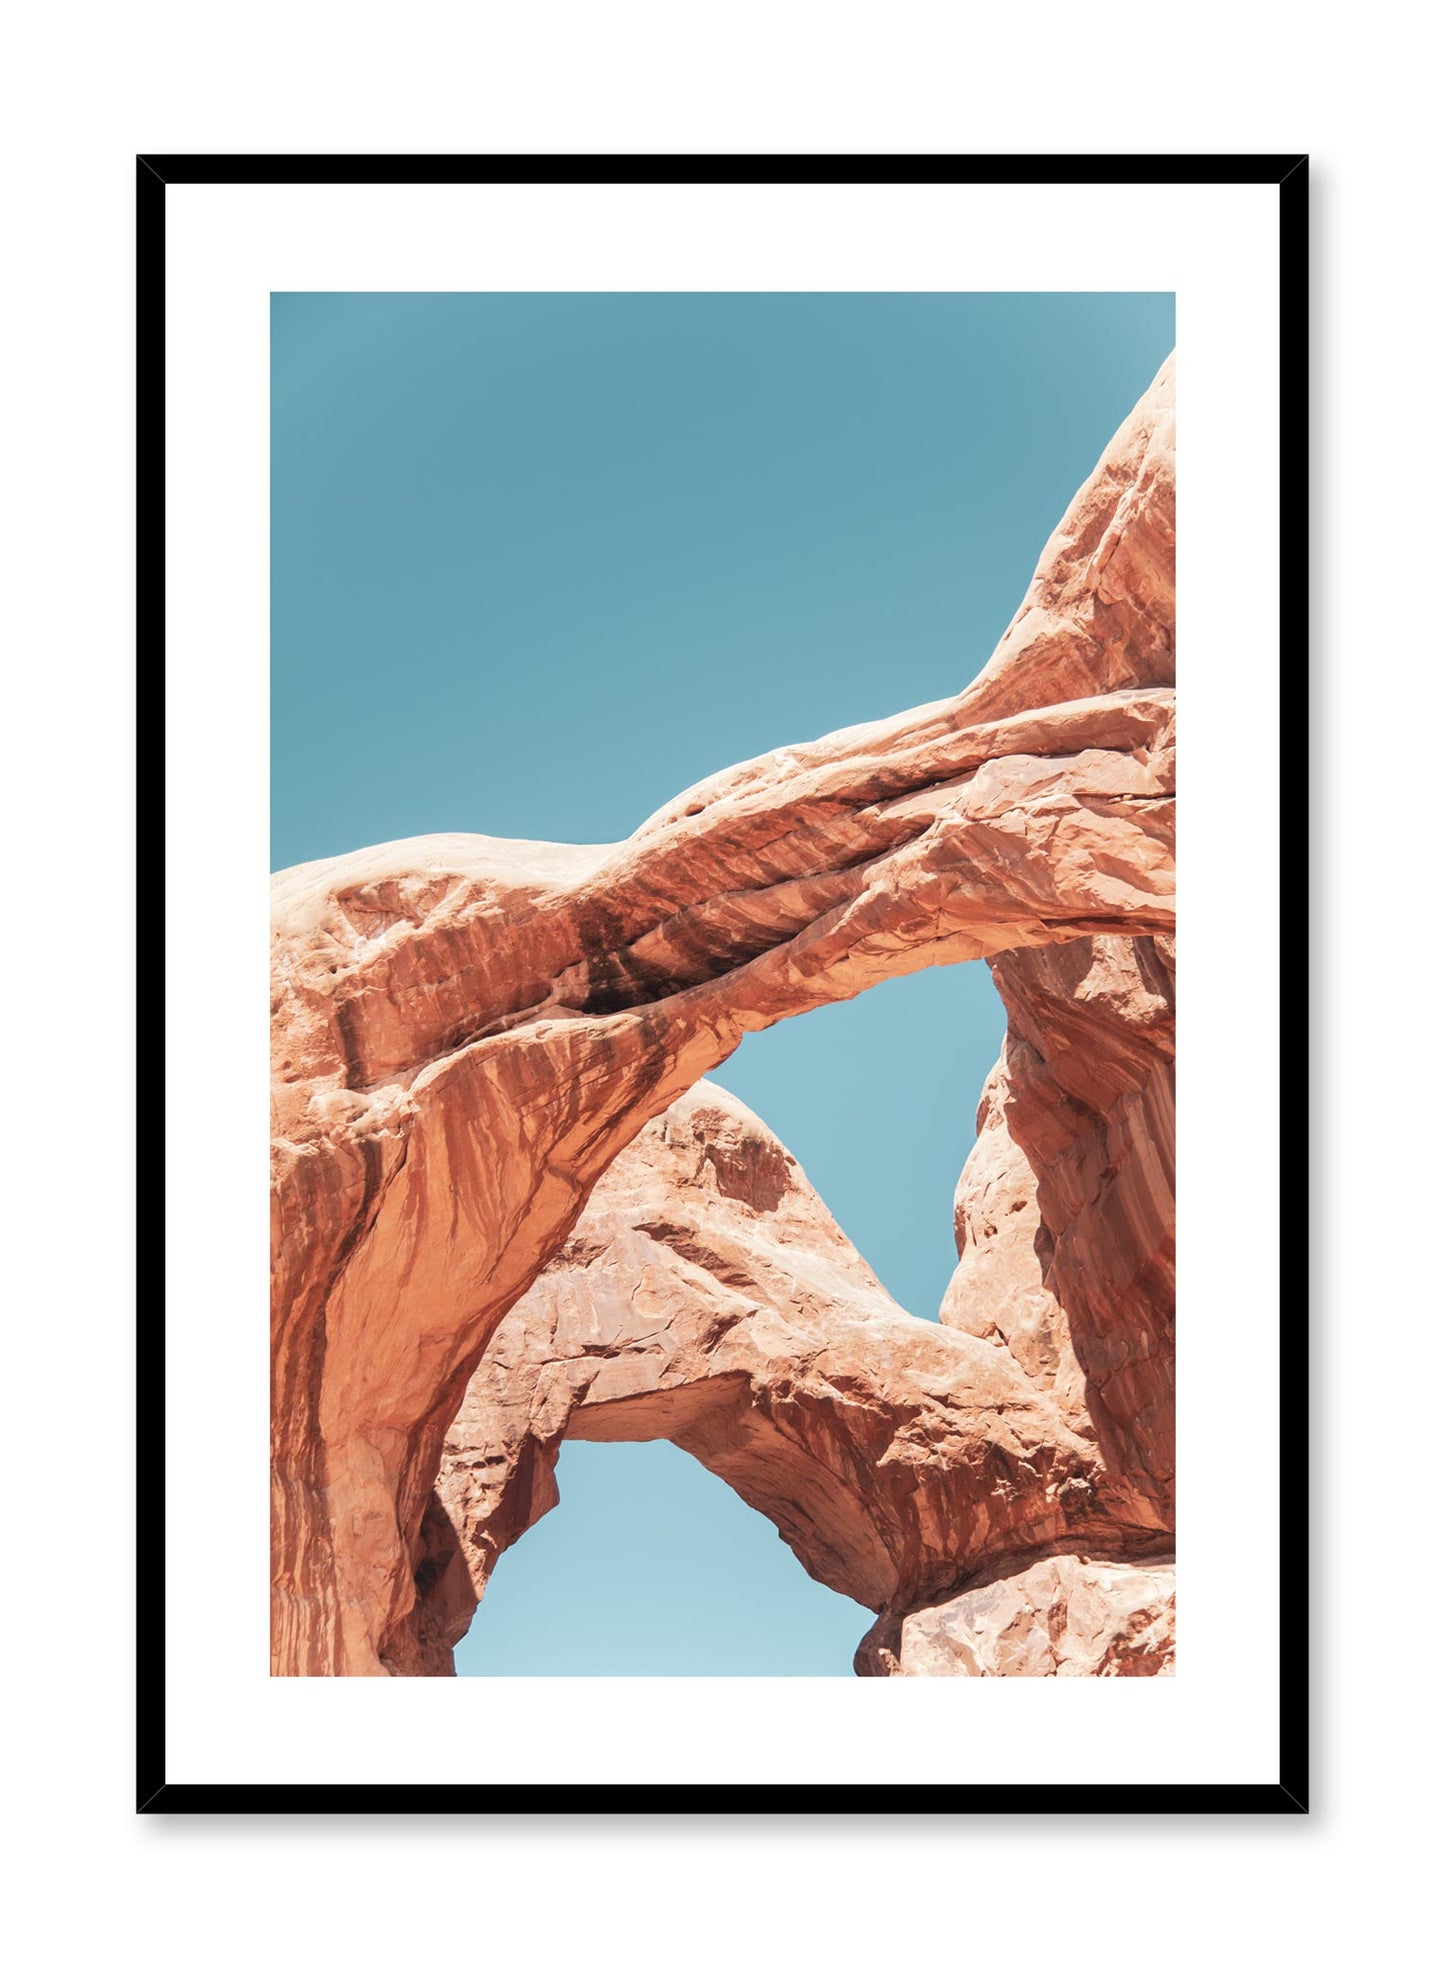 Minimalist design poster by Opposite Wall with photography of red rock formations